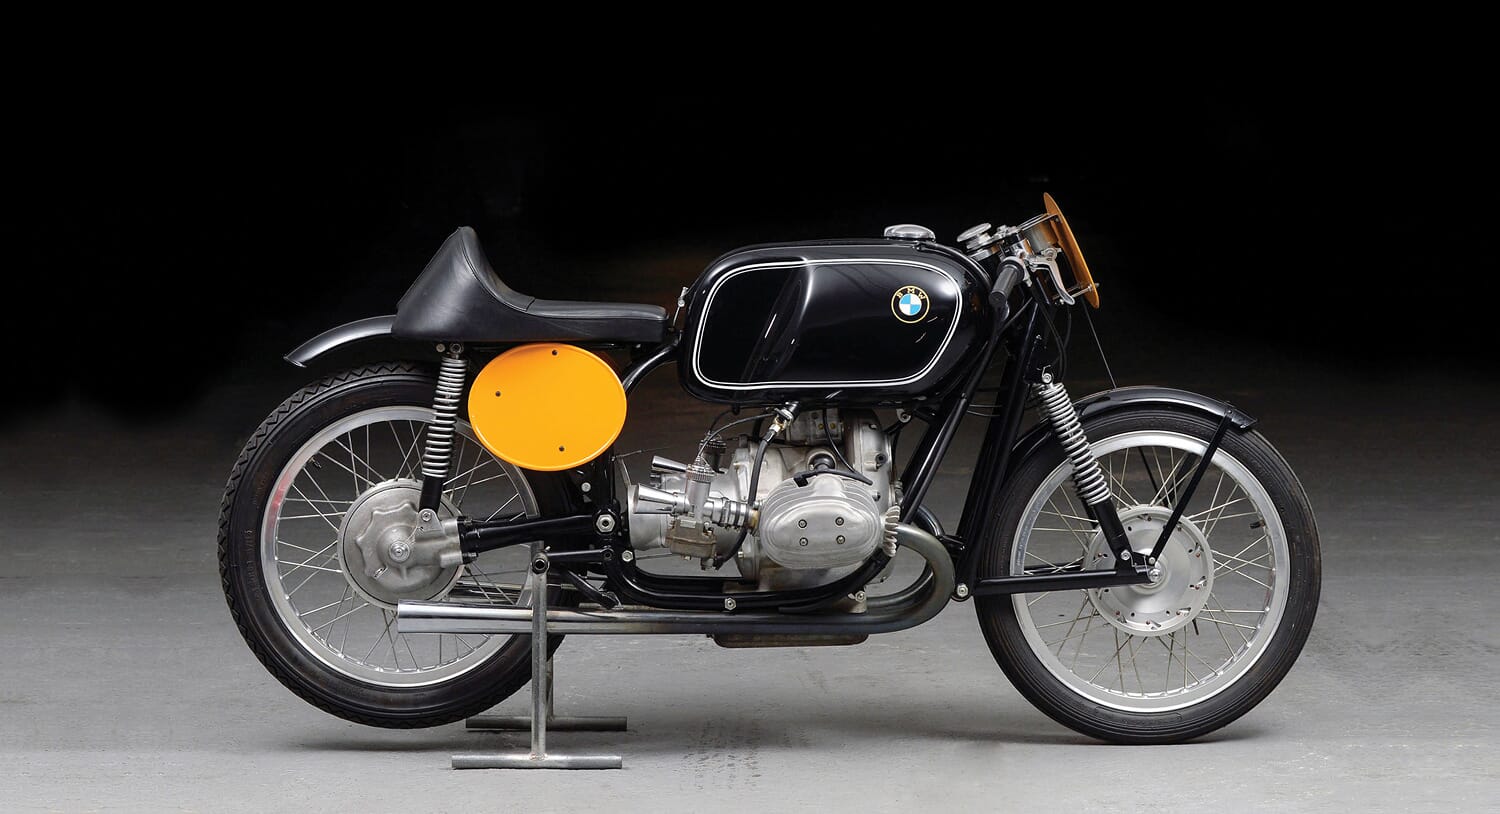 Reborn: Is This 1954 BMW RS 54 Better Than The Original?